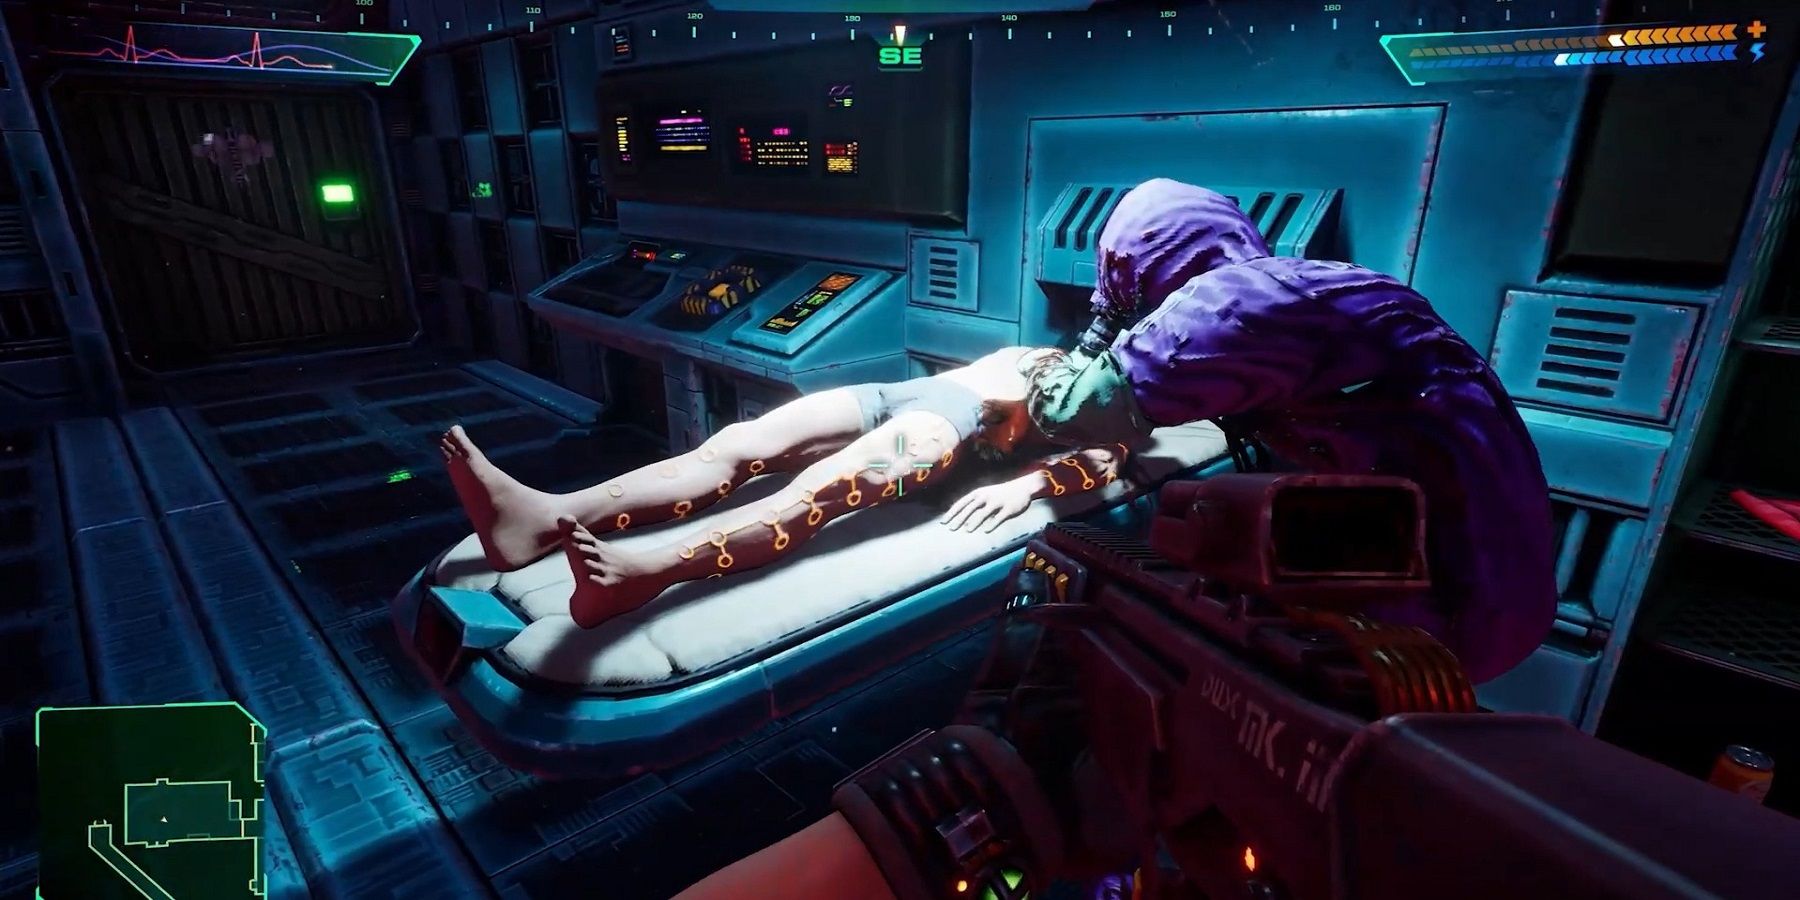 Image from the upcoming System Shock remake showing an NPC in a hazard suit tending to a body on a table.